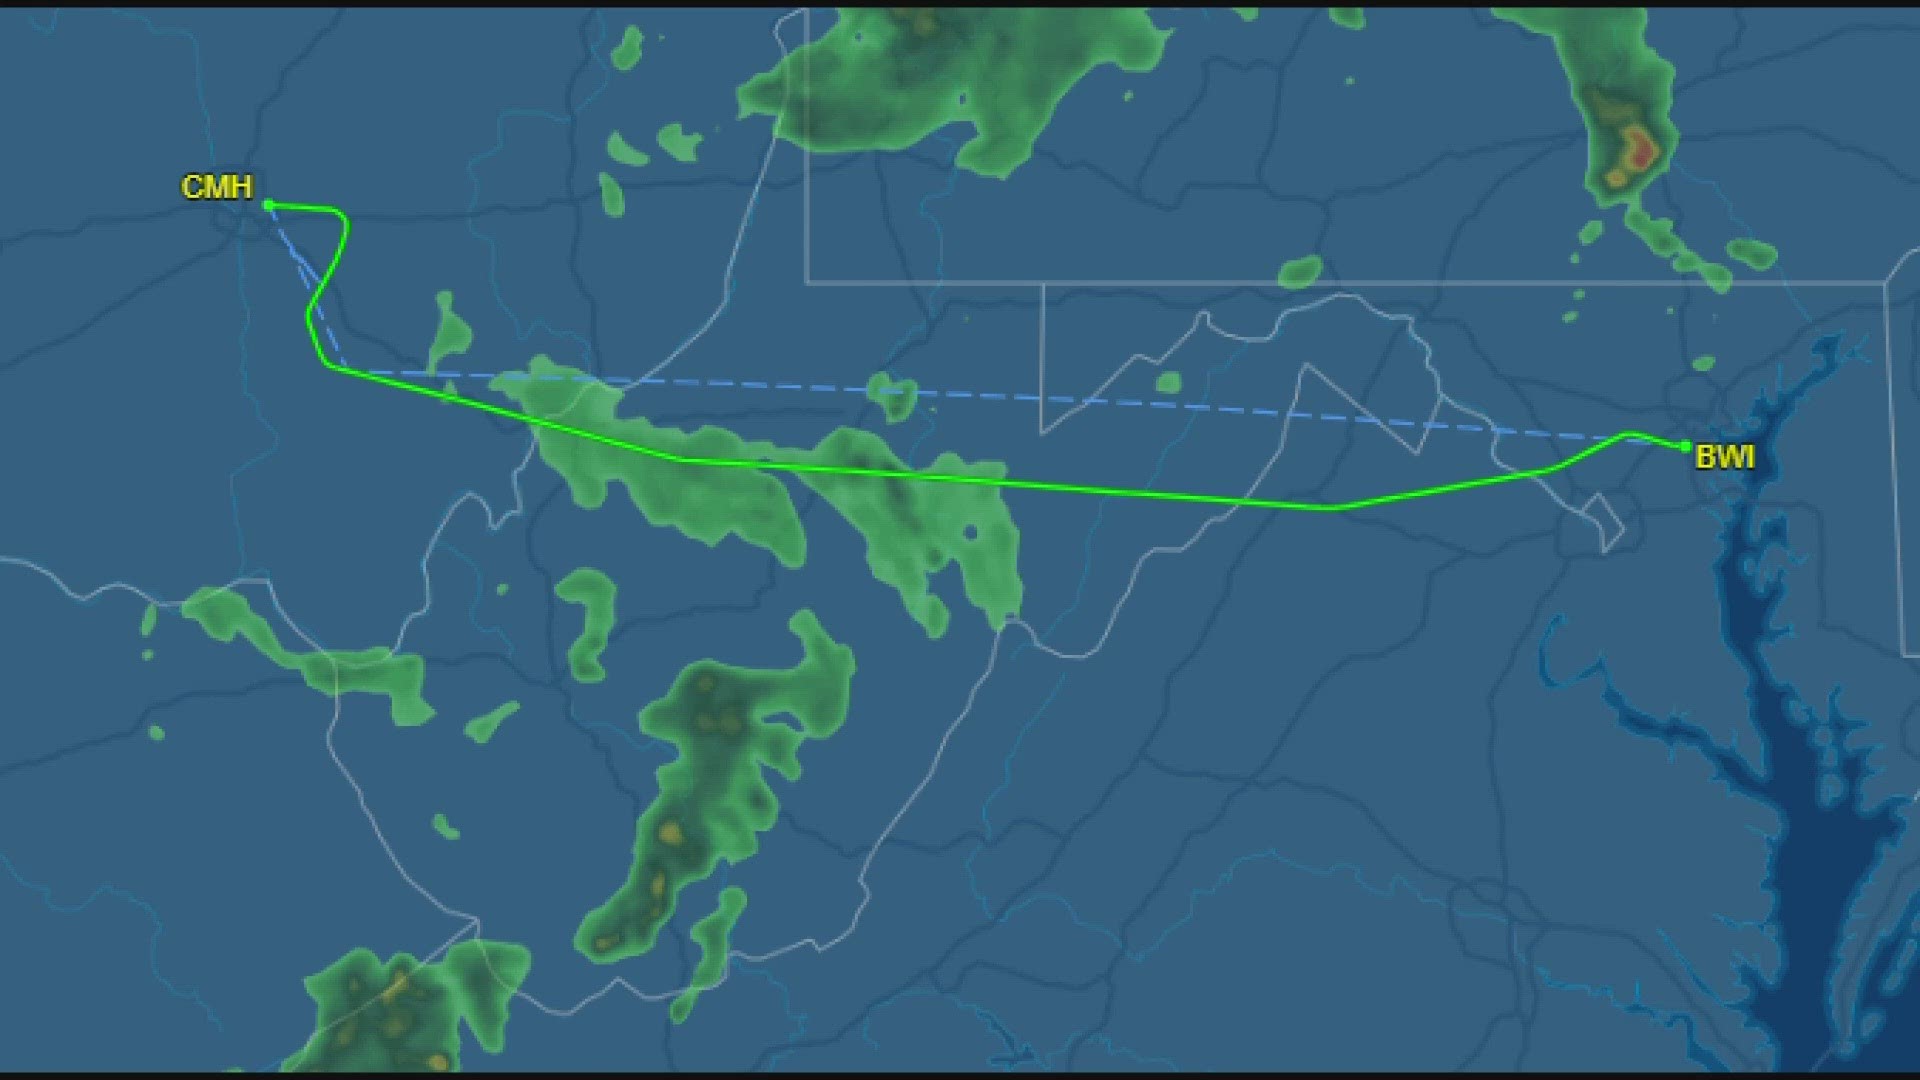 The flight took off in Maryland and encountered a pressurization issue during the flight.